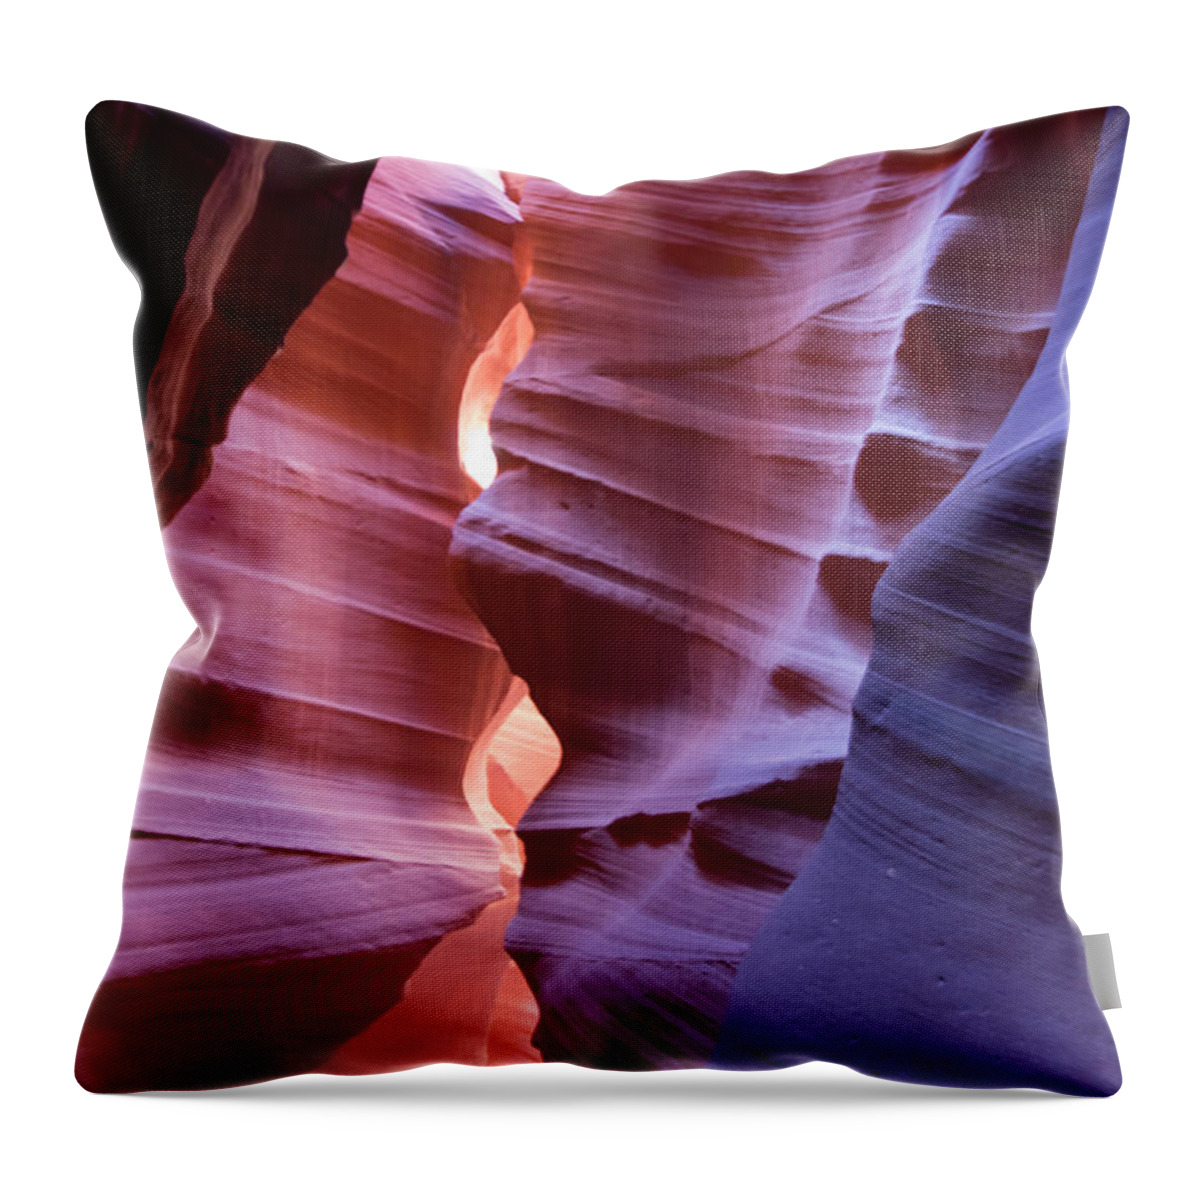 Abstract Throw Pillow featuring the photograph Antelope Canyon by Carlos Cano